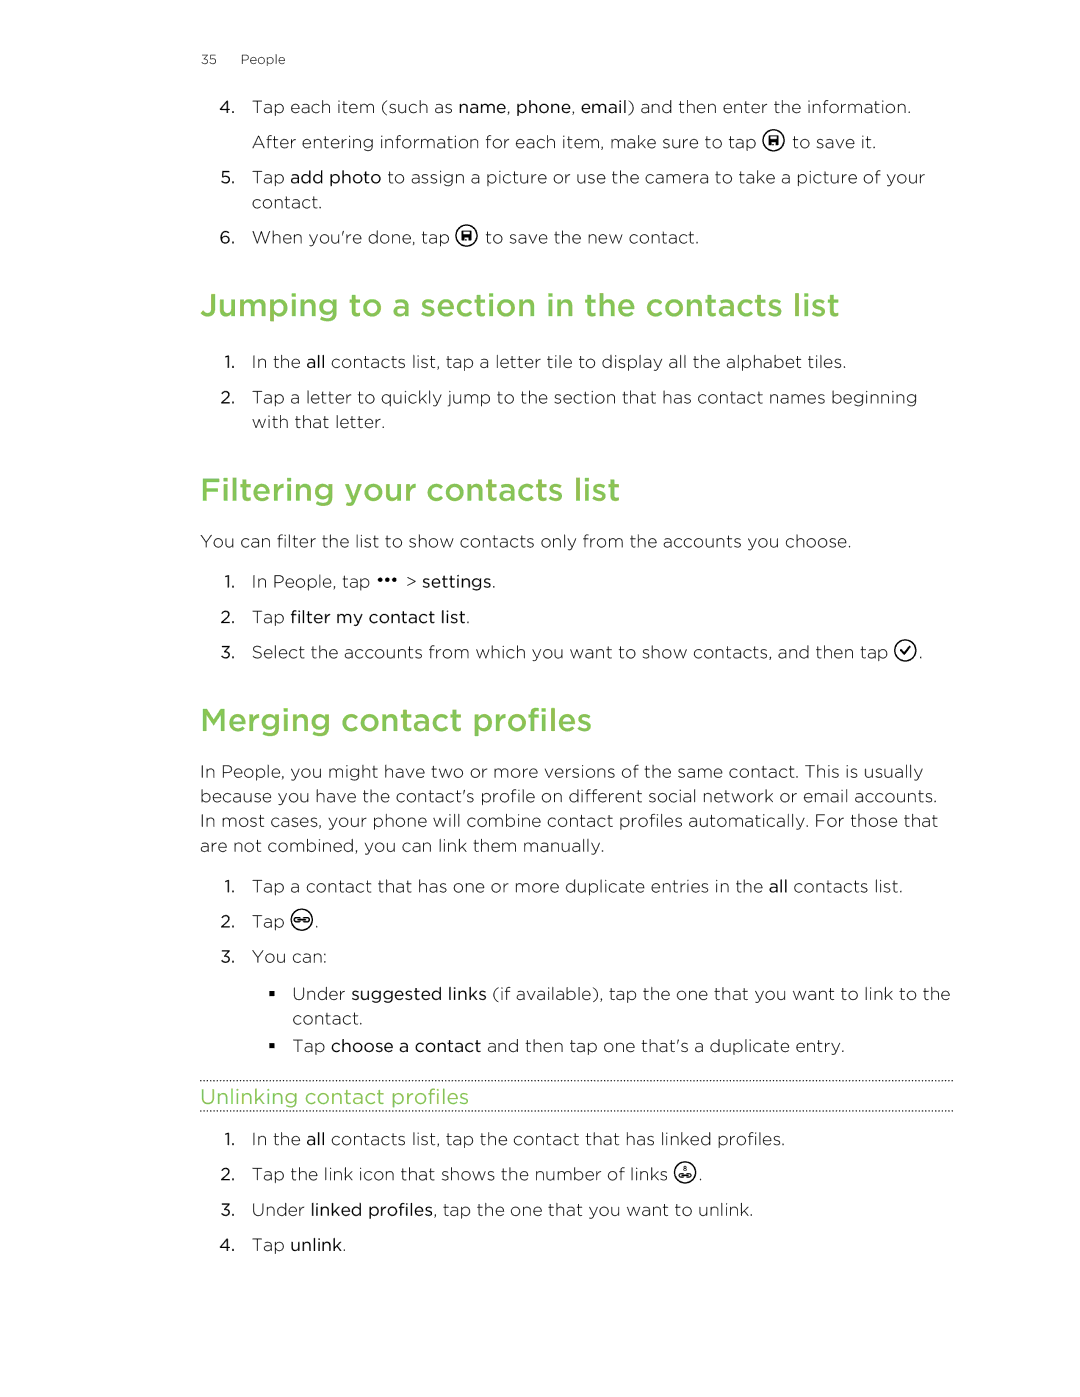 HTC 8X manual Jumping to a section in the contacts list, Filtering your contacts list, Merging contact profiles 